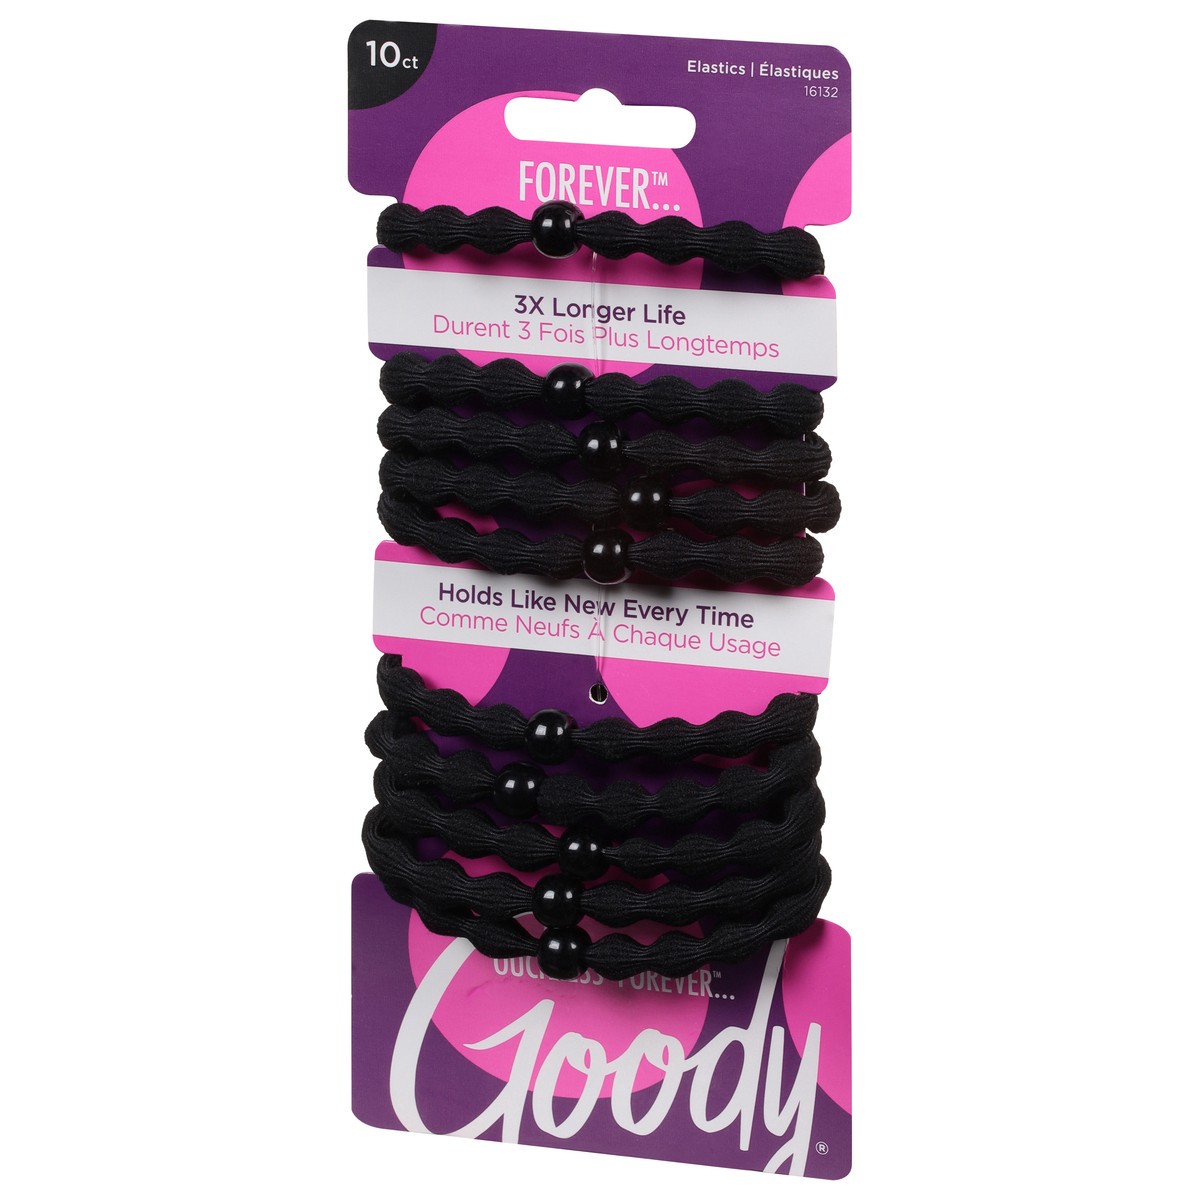 slide 3 of 9, Goody Ouchless Forever Elastics 10 ea, 10 ct